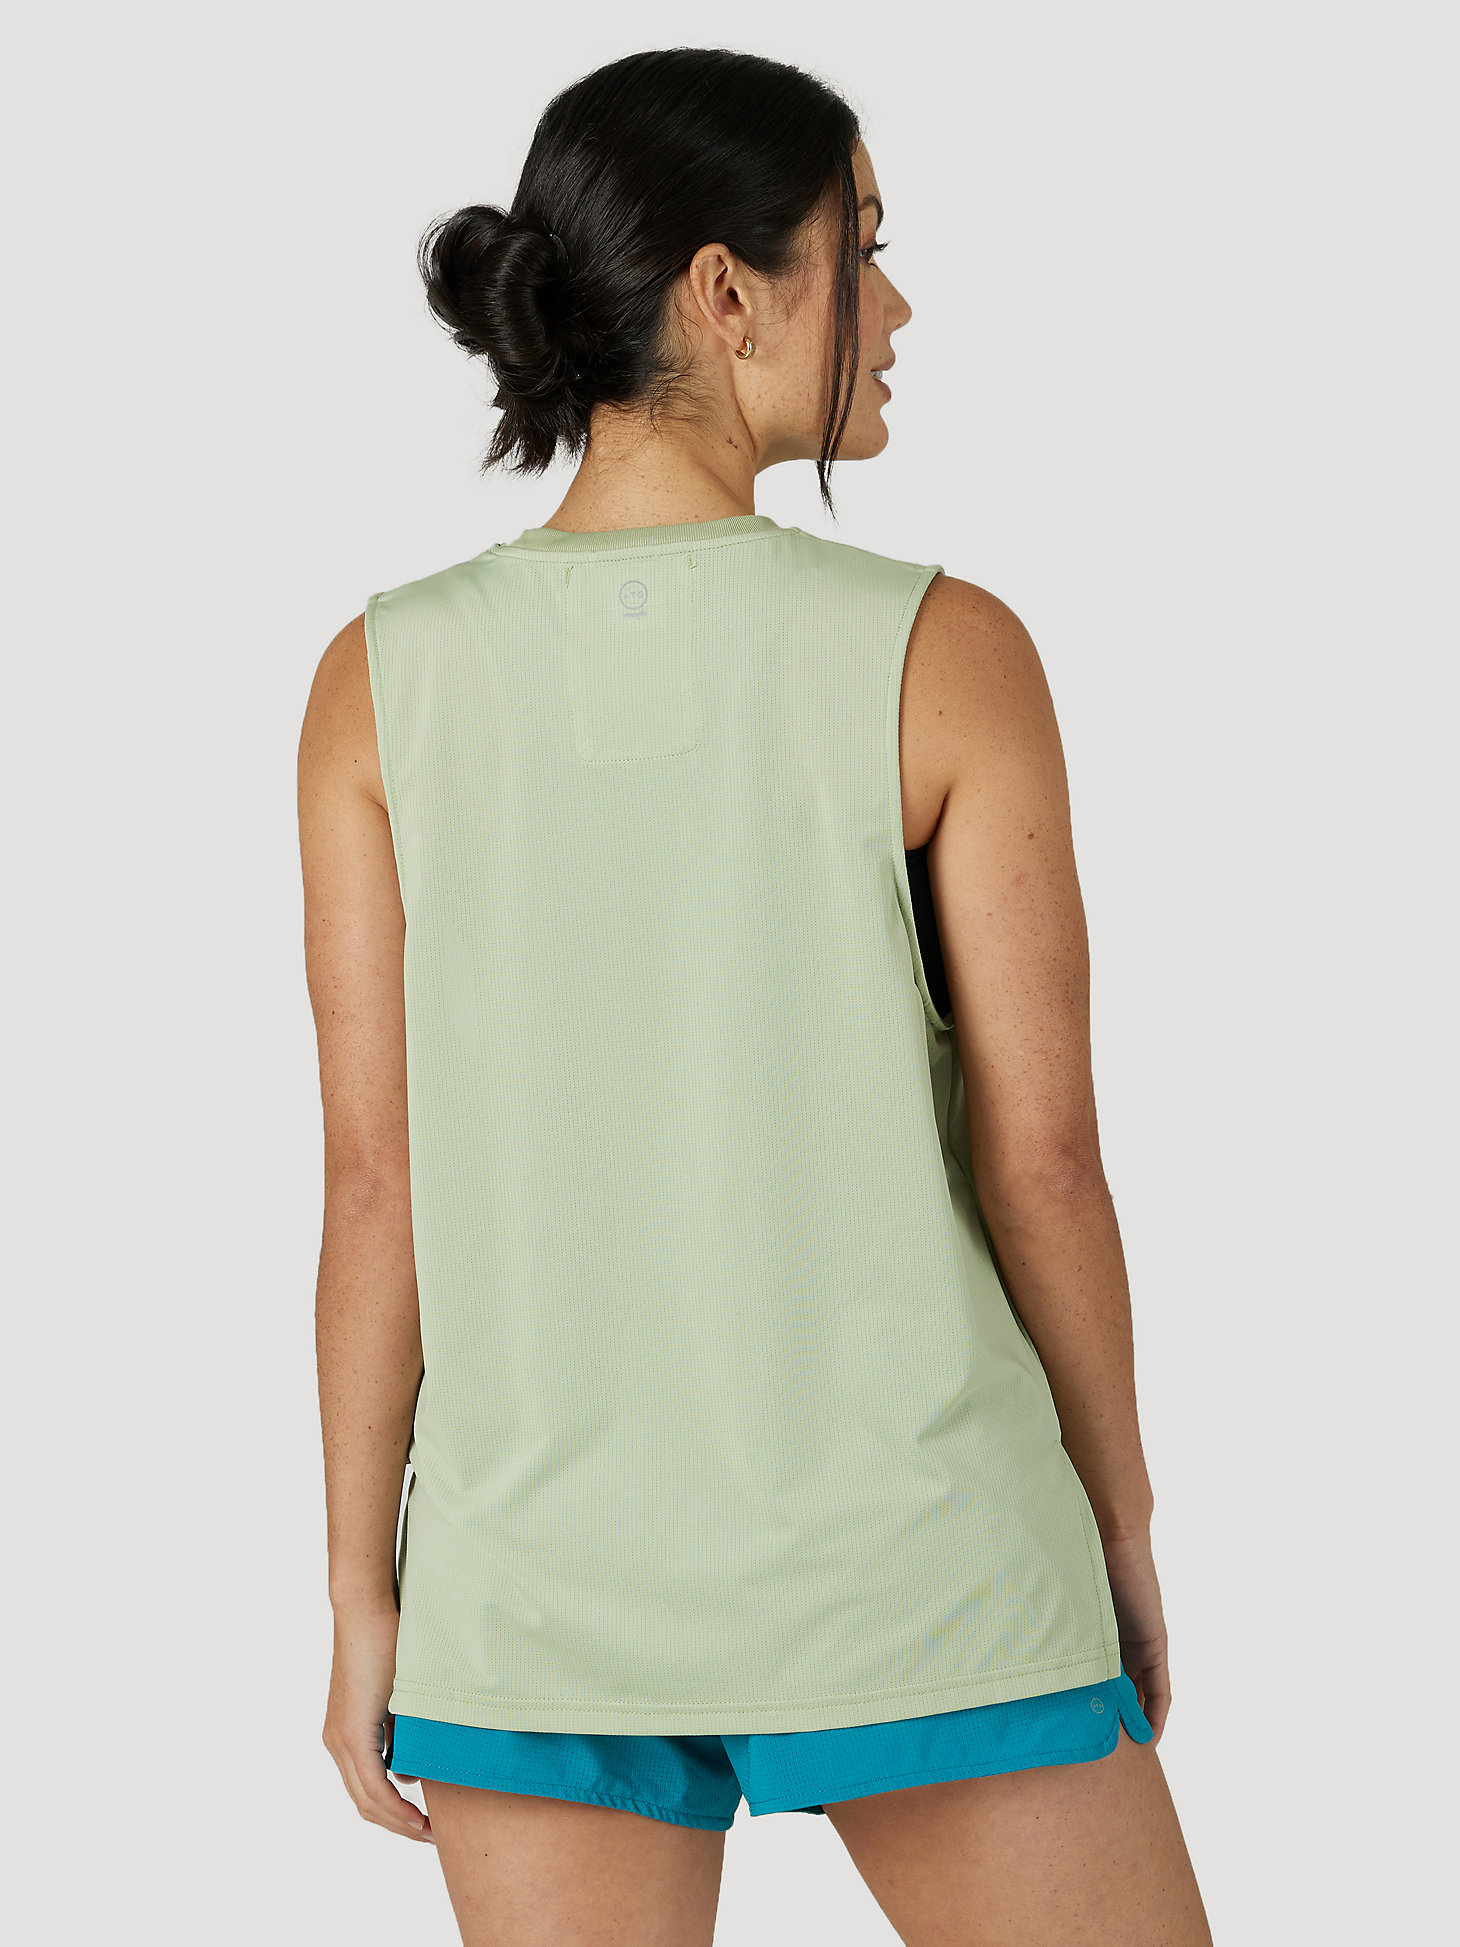 ATG By Wrangler™ Women's Relaxed Fit Tank in Reseda alternative view 1